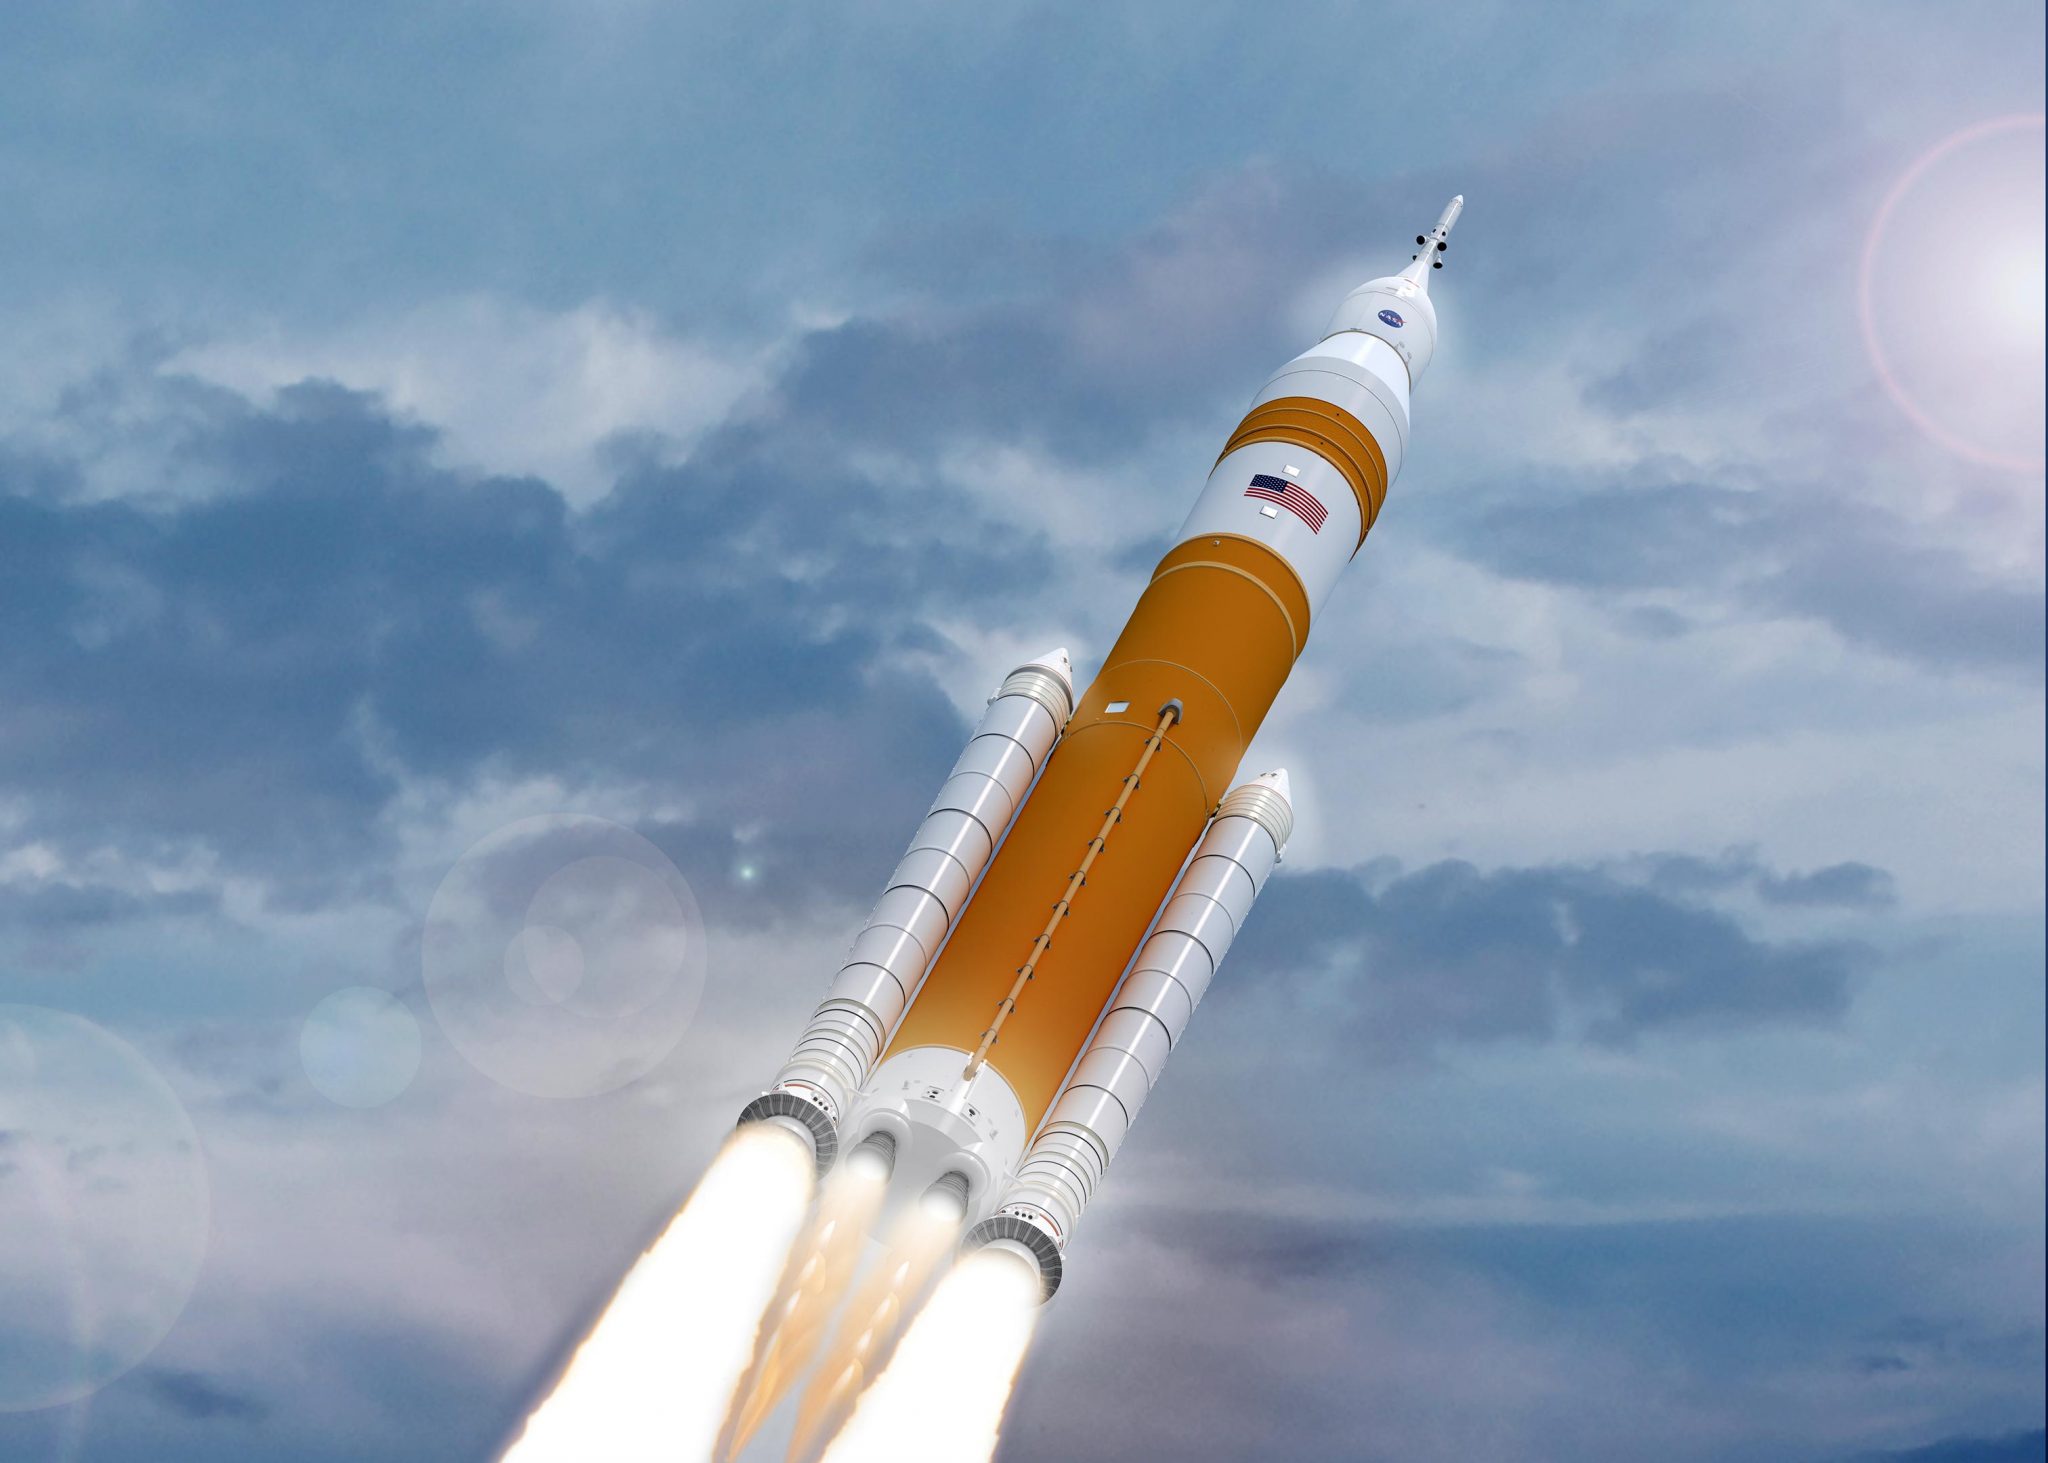 New Date Set for NASA’s Next Launch Attempt of Artemis I Moon Mission